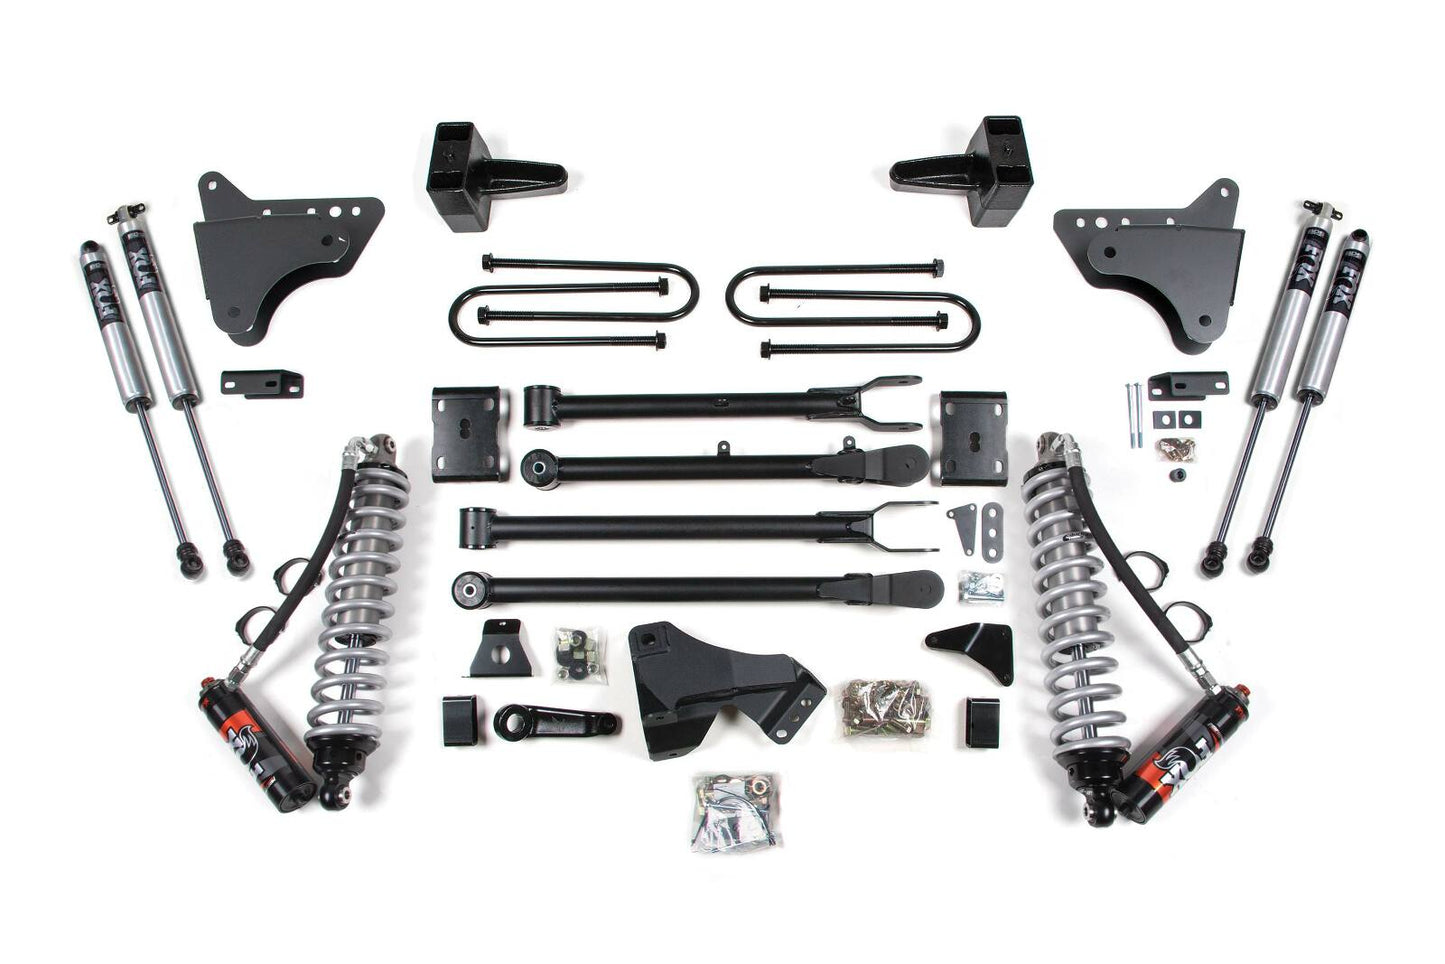 2011-2016 Ford F250/F350 4wd 4" 4-Link Suspension Lift Kit, 2" Rear, Block, Diesel - Fox 2.5 PES C/O Front, Fox 2.0 IFP PS Aux Front, Fox 2.0 IFP PS Rear